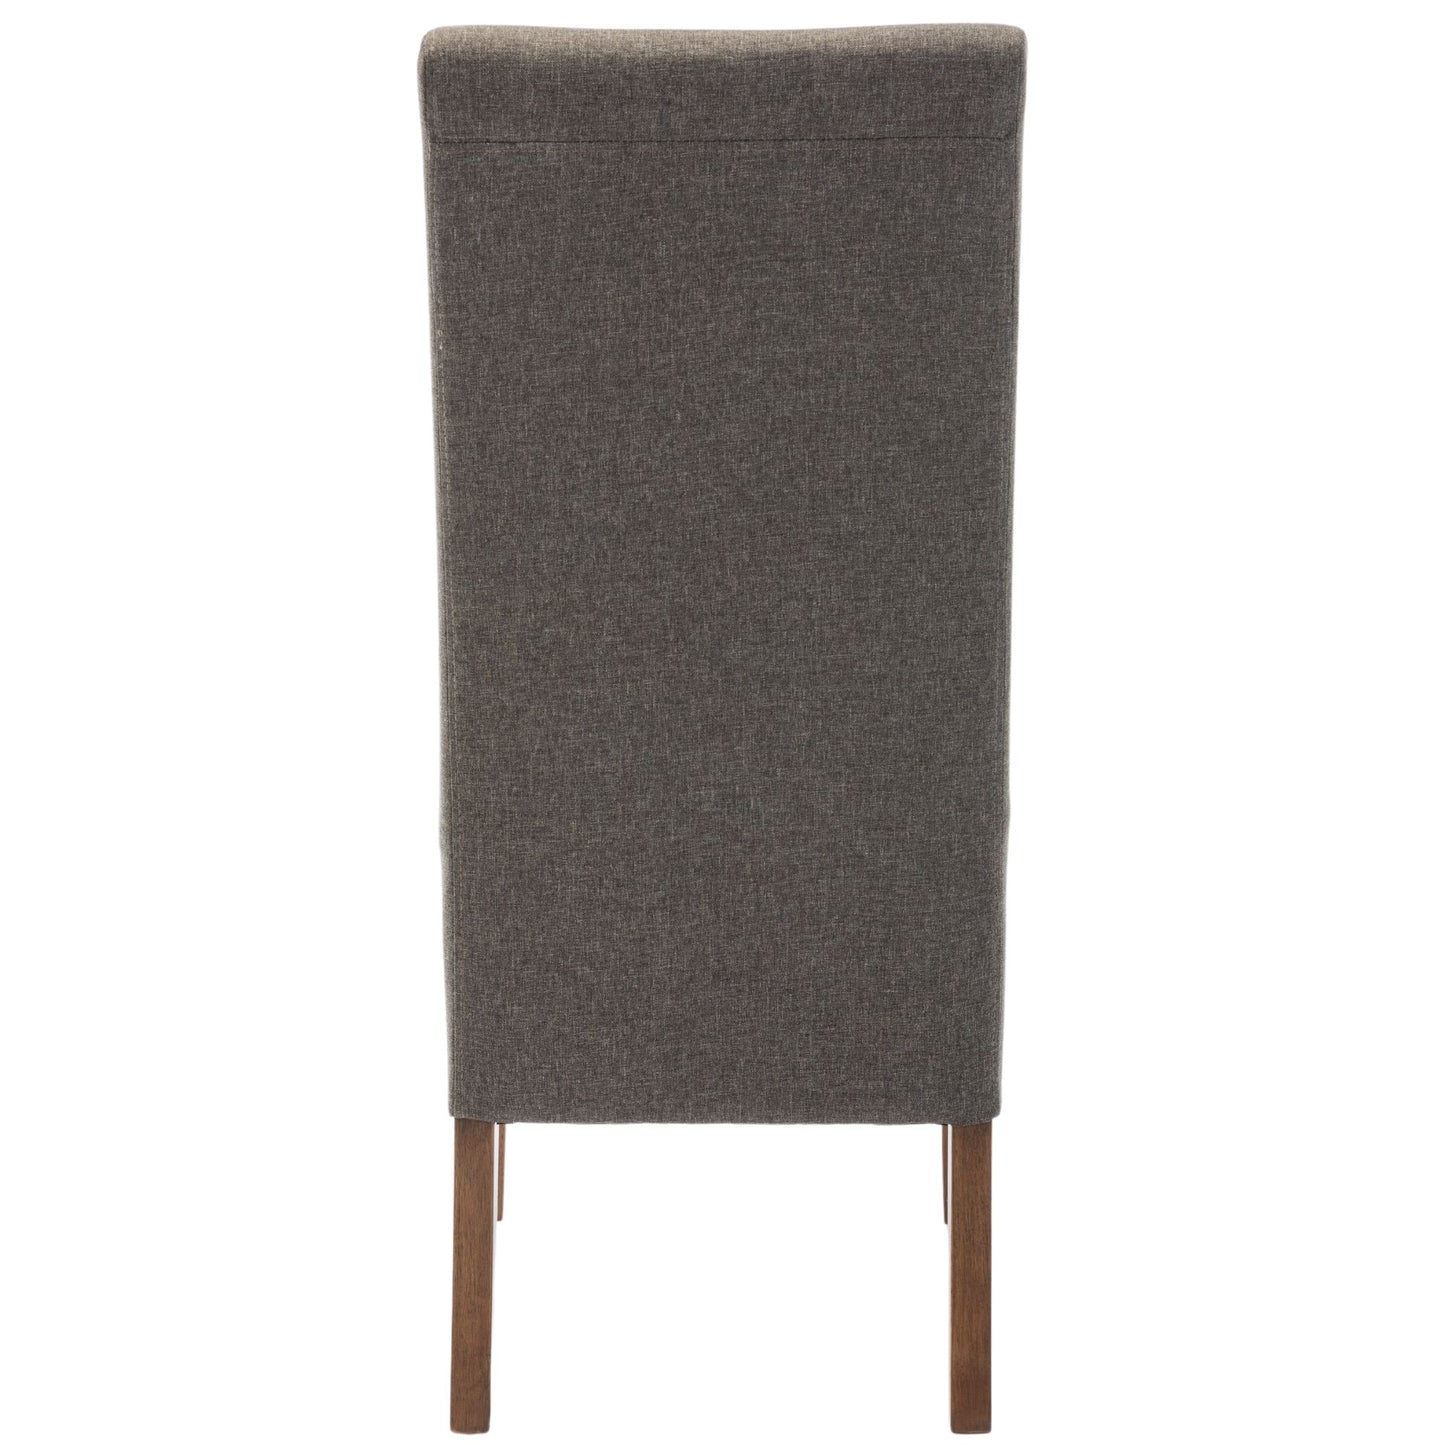 Aksa Fabric Upholstered Dining Chair Set of 4 Solid Pine Wood - Grey